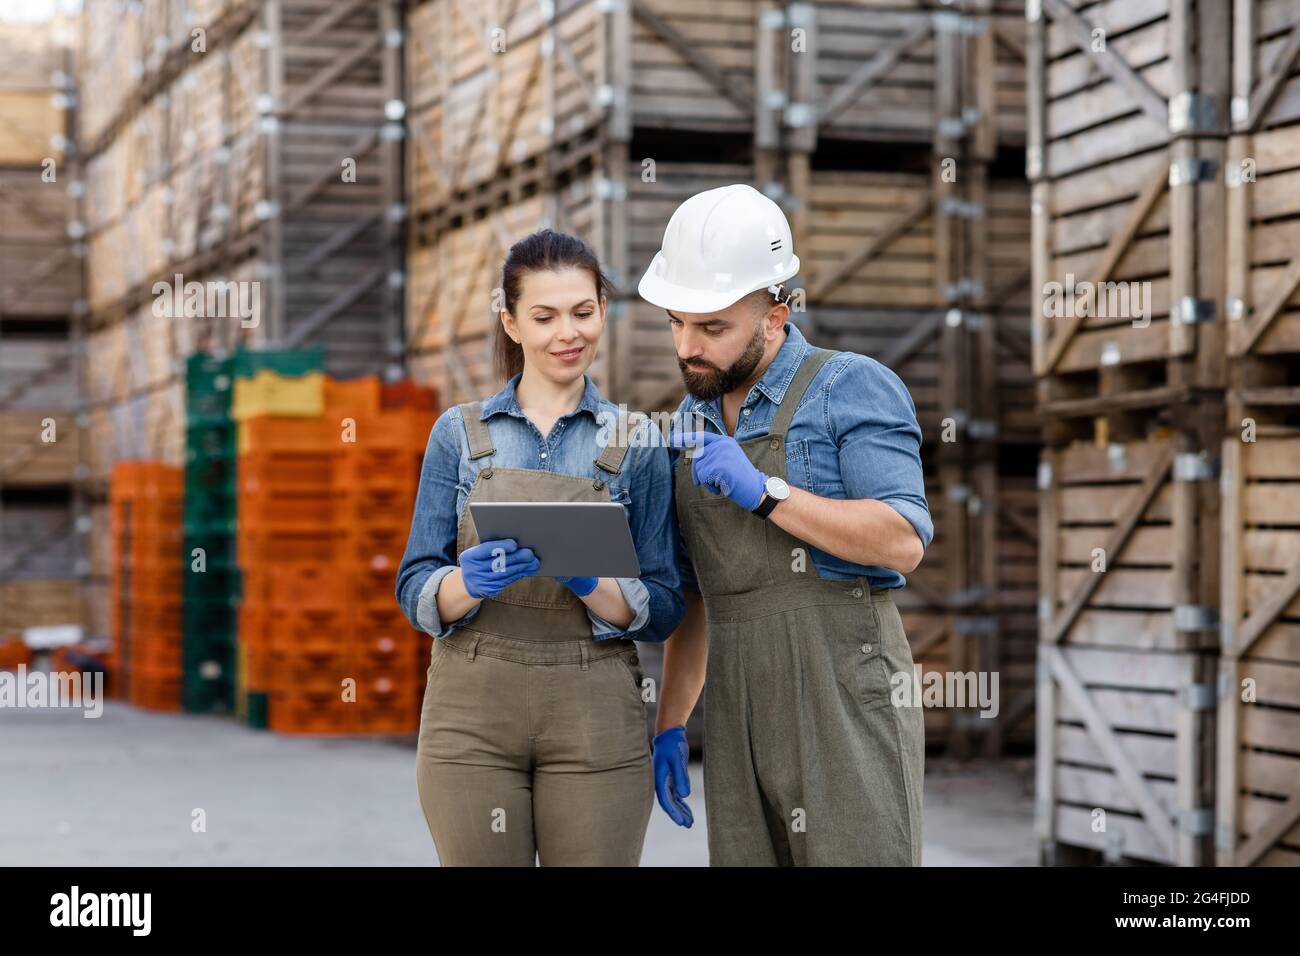 Warehouse management, device for work, distribution and sale of organic natural fruits Stock Photo